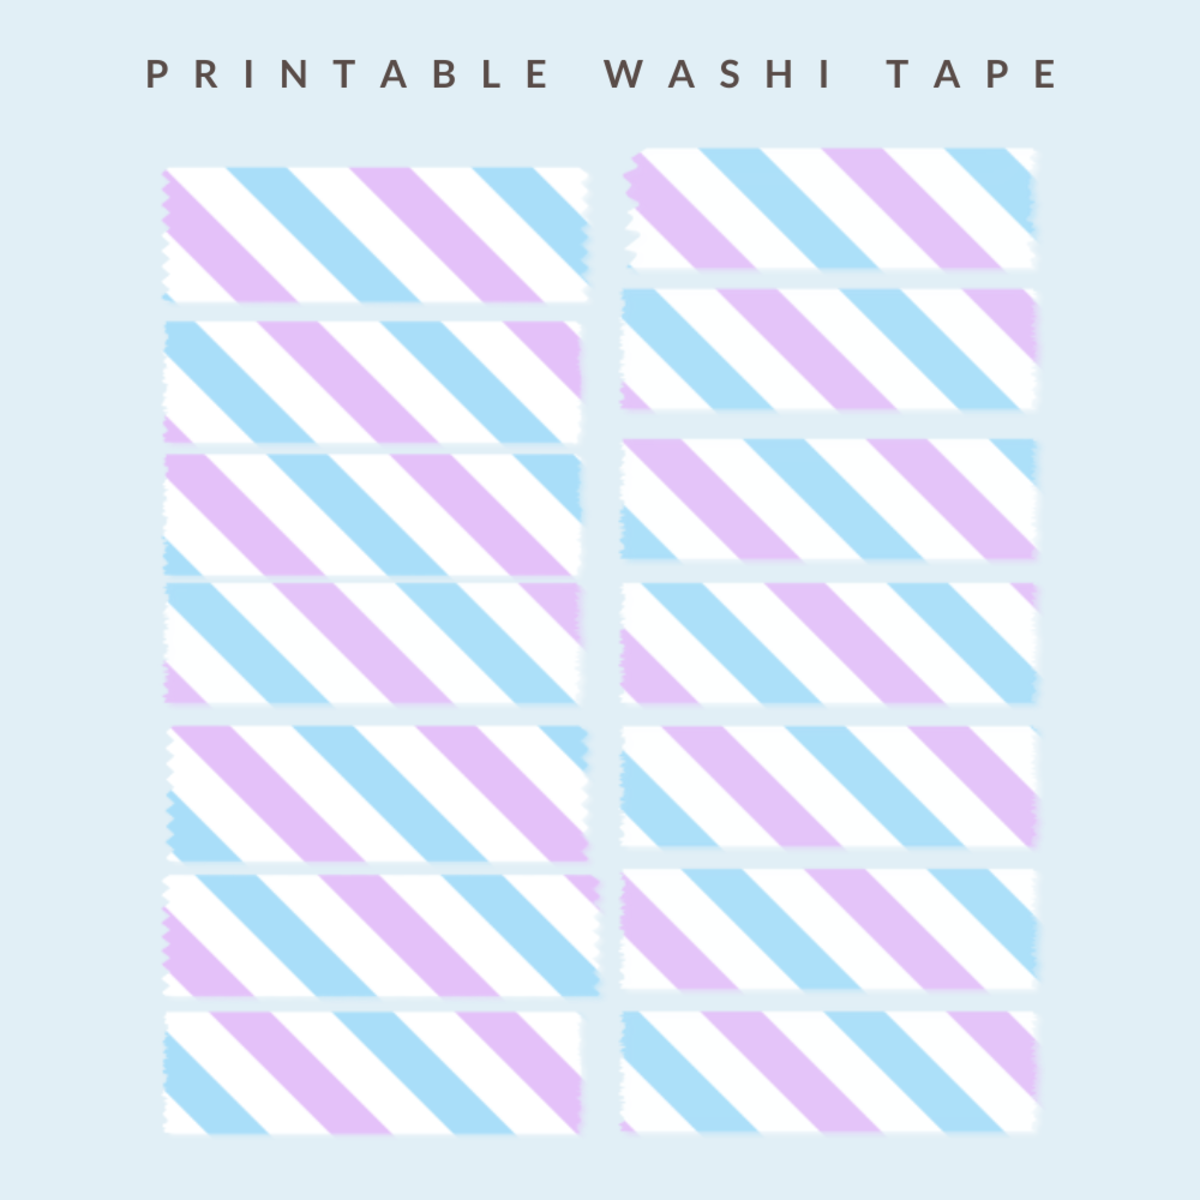 Printable Washi Tape PNG Image, Aesthetic Washi Tape In Blue And